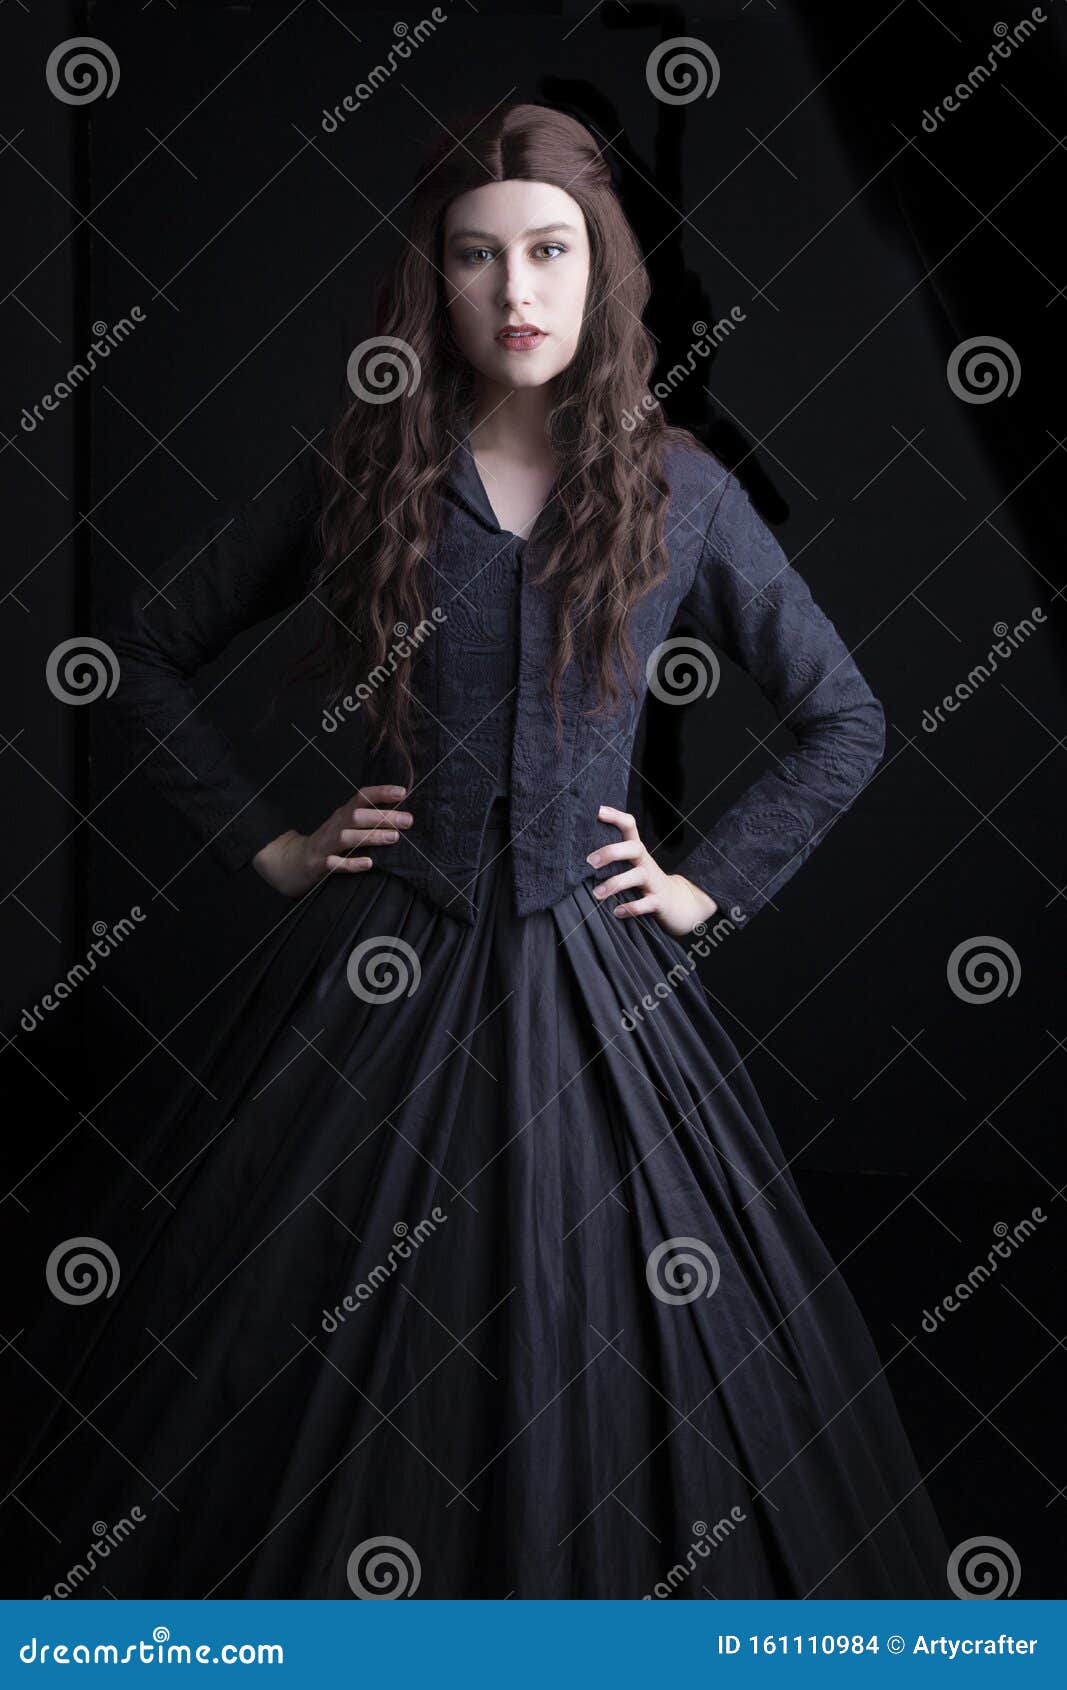 long-haired, brunette victorian woman in a black ensemble